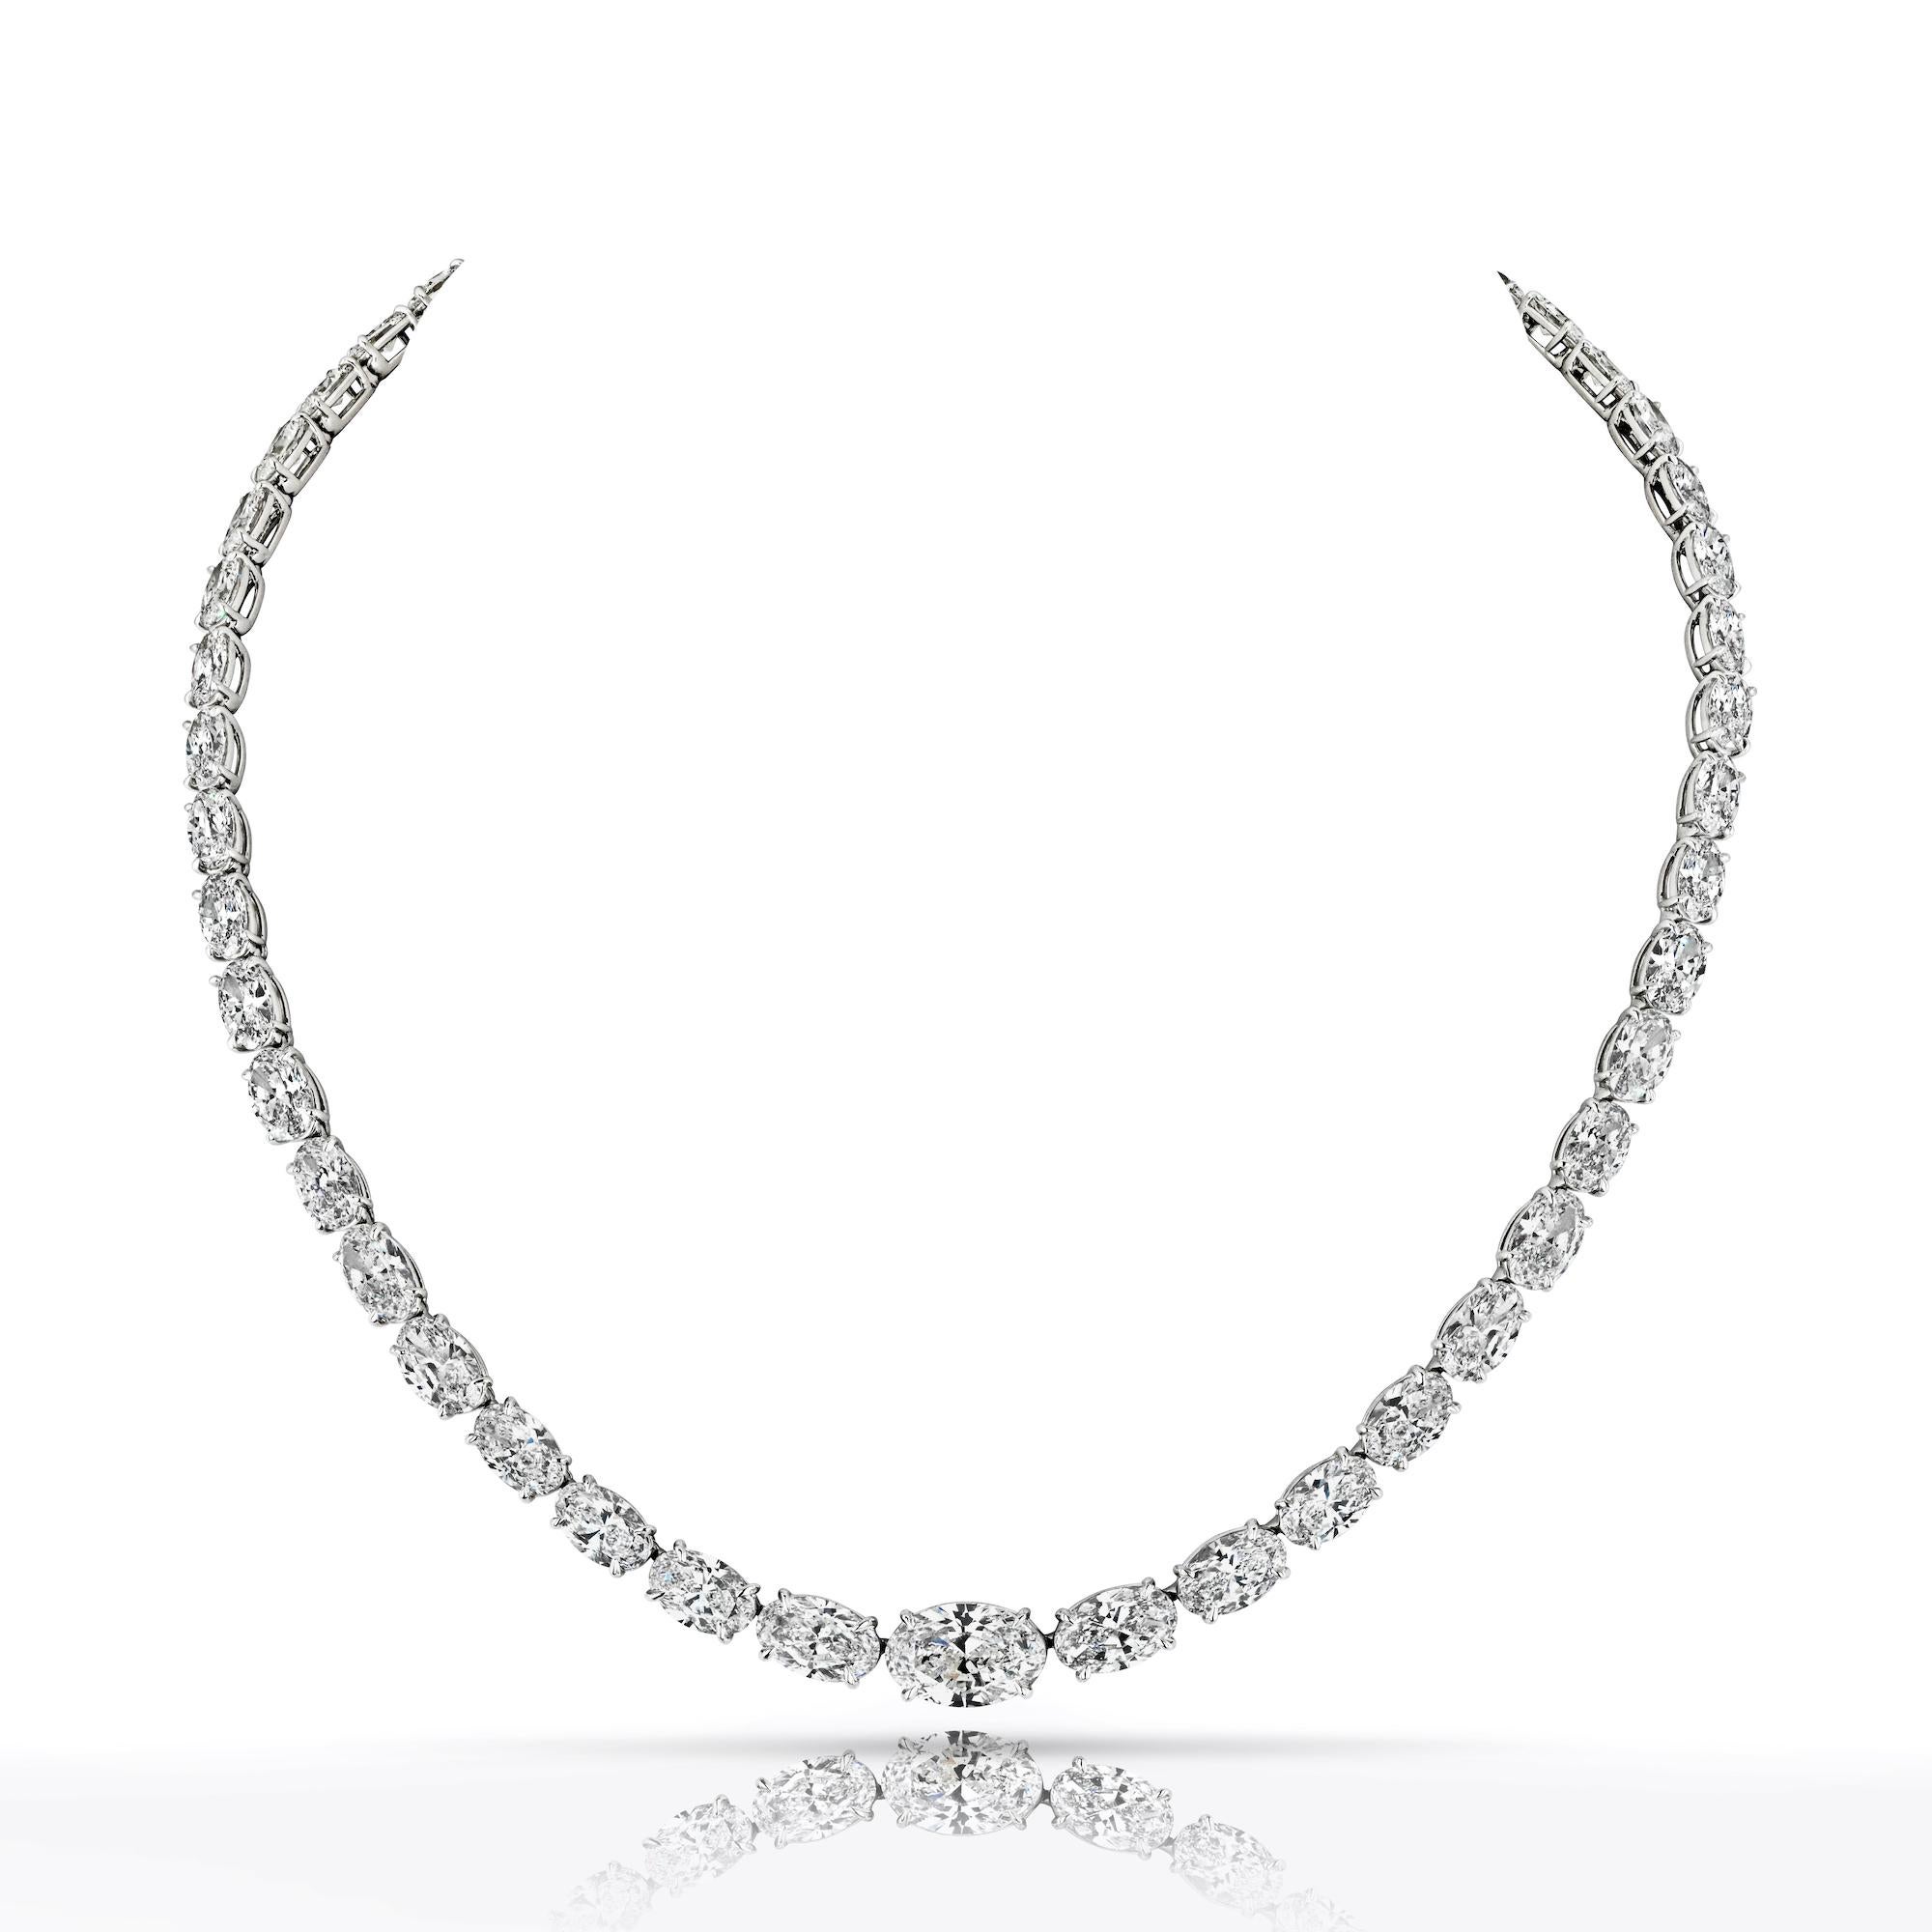 A Louis Newman & Company masterpiece! After months in the making we finally completed this one of a kind Oval Cut  Diamond Riviera Necklace. 35.13 carats of perfectly cut oval cut diamonds. The center stone is a GIA certified 3.01 carat D color Si1